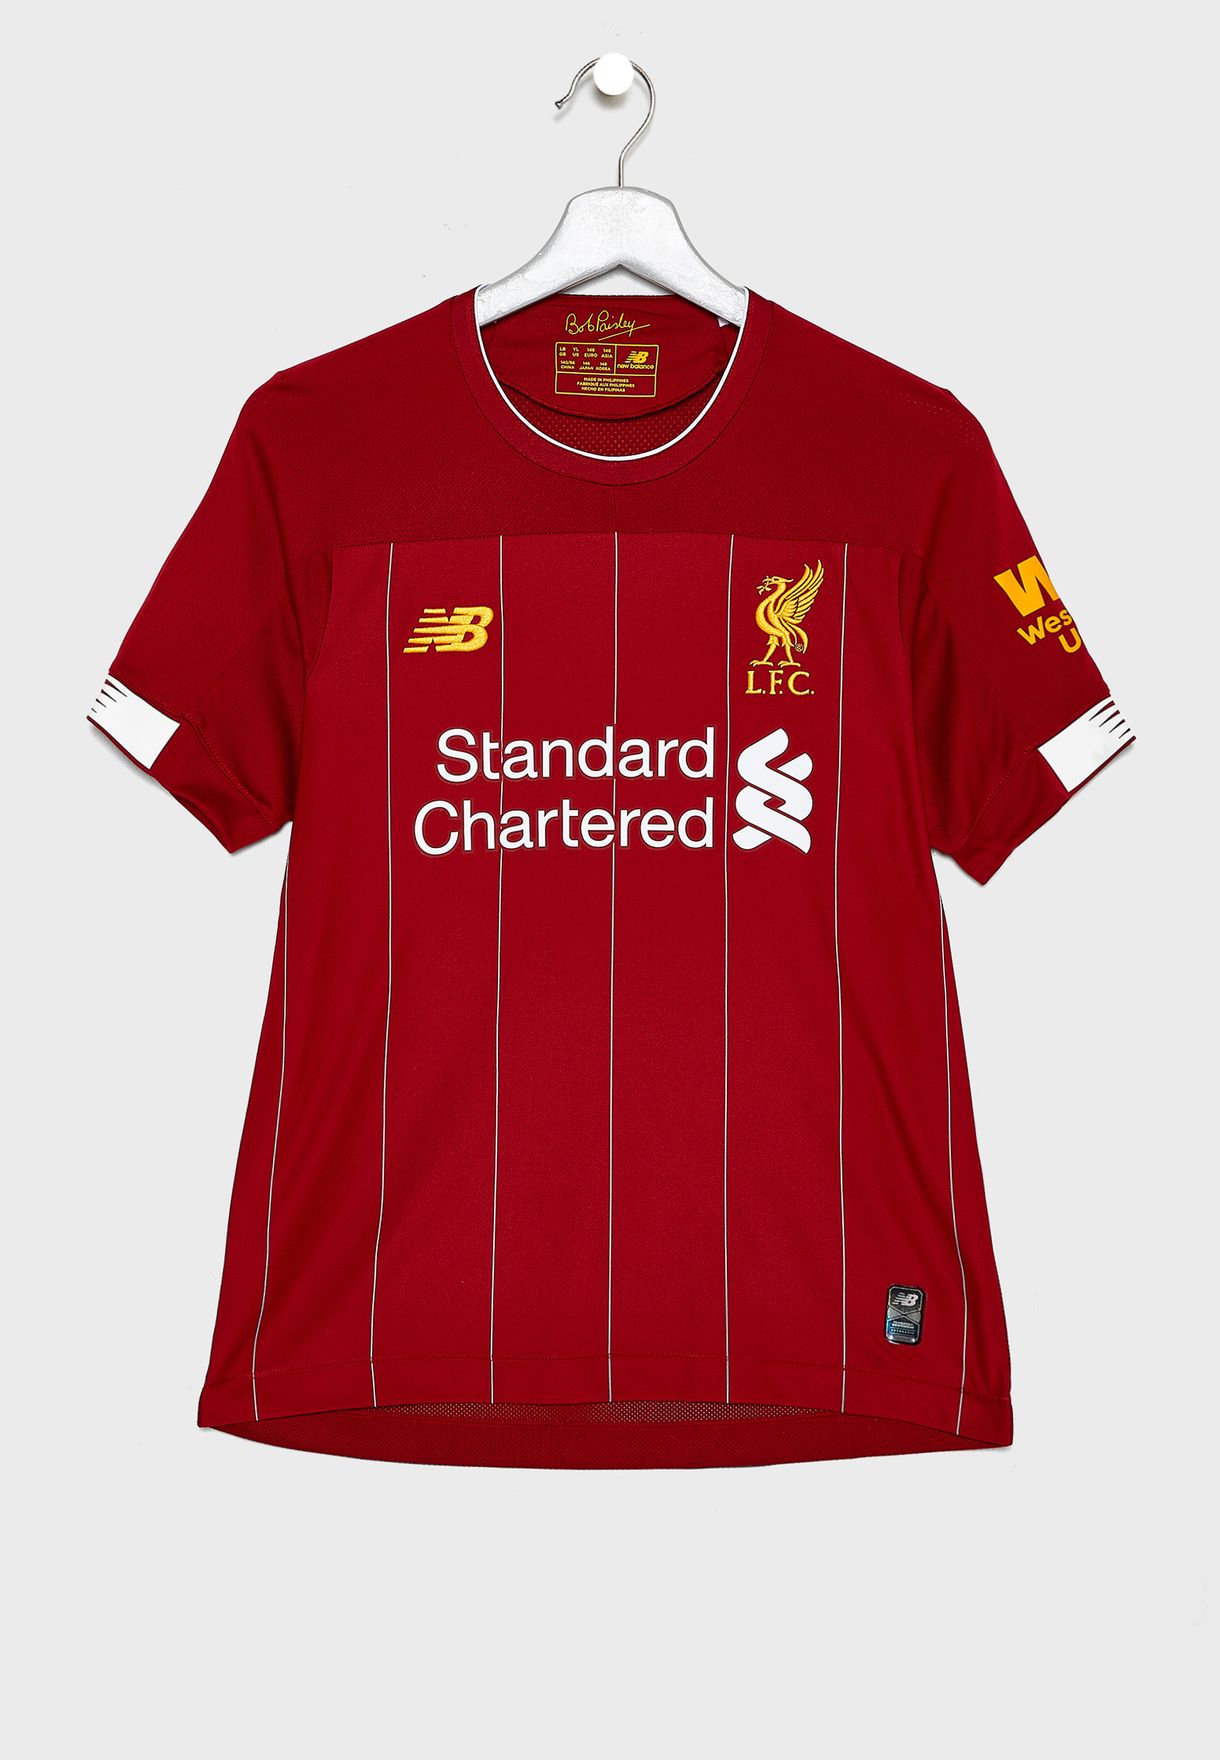 where can i buy liverpool jersey